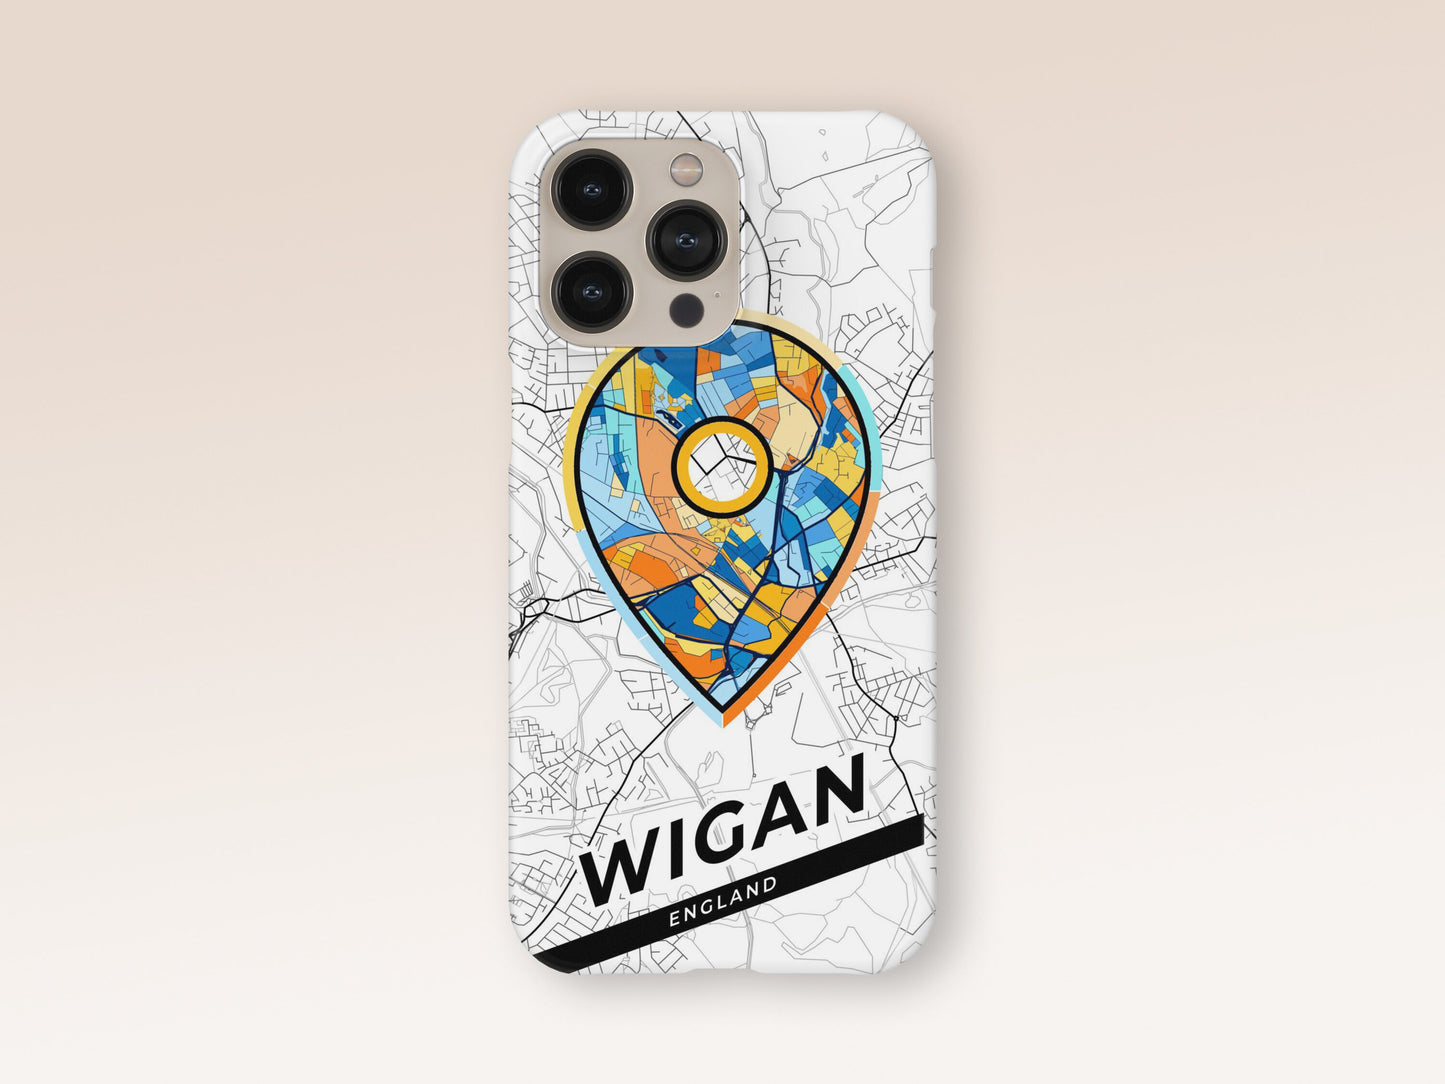 Wigan England slim phone case with colorful icon 1